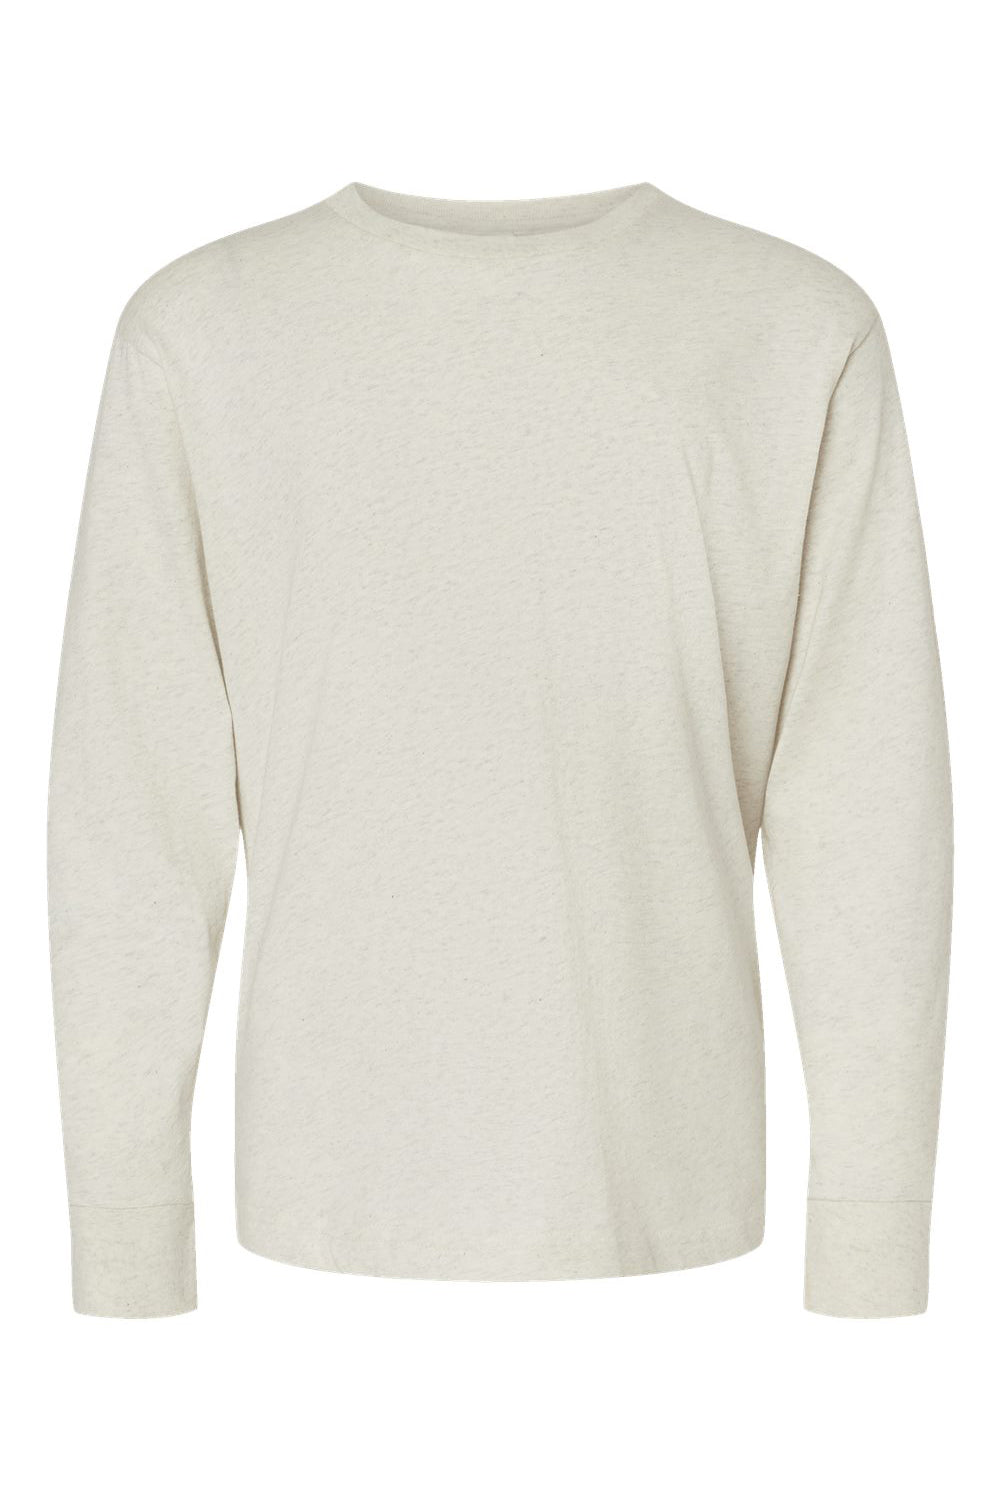 LAT 6201 Youth Fine Jersey Long Sleeve Crewneck T-Shirt Heather Natural Flat Front